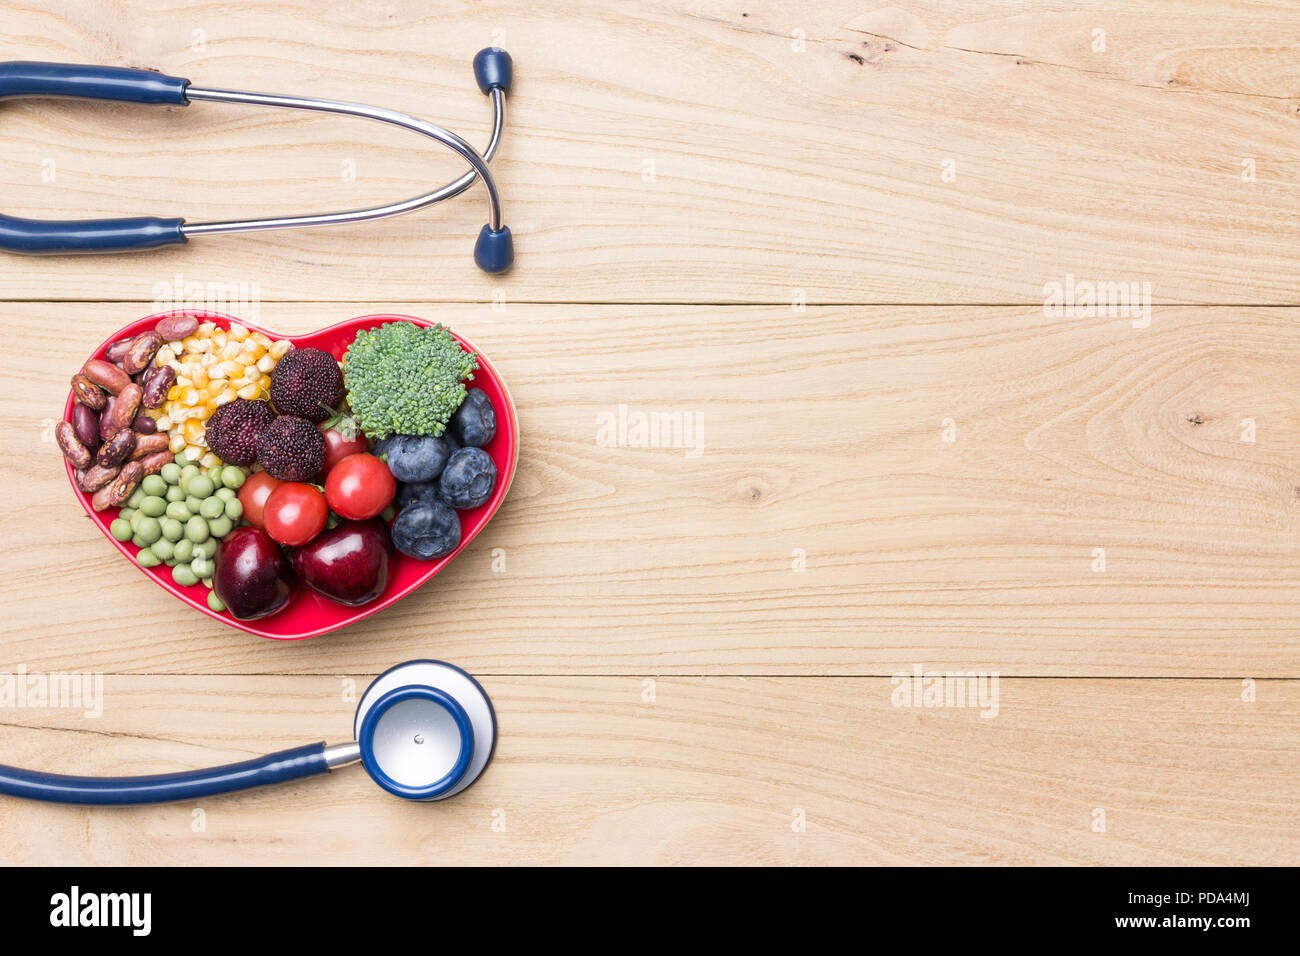 Healthy diet in a heart shaped bowl Stock Photo